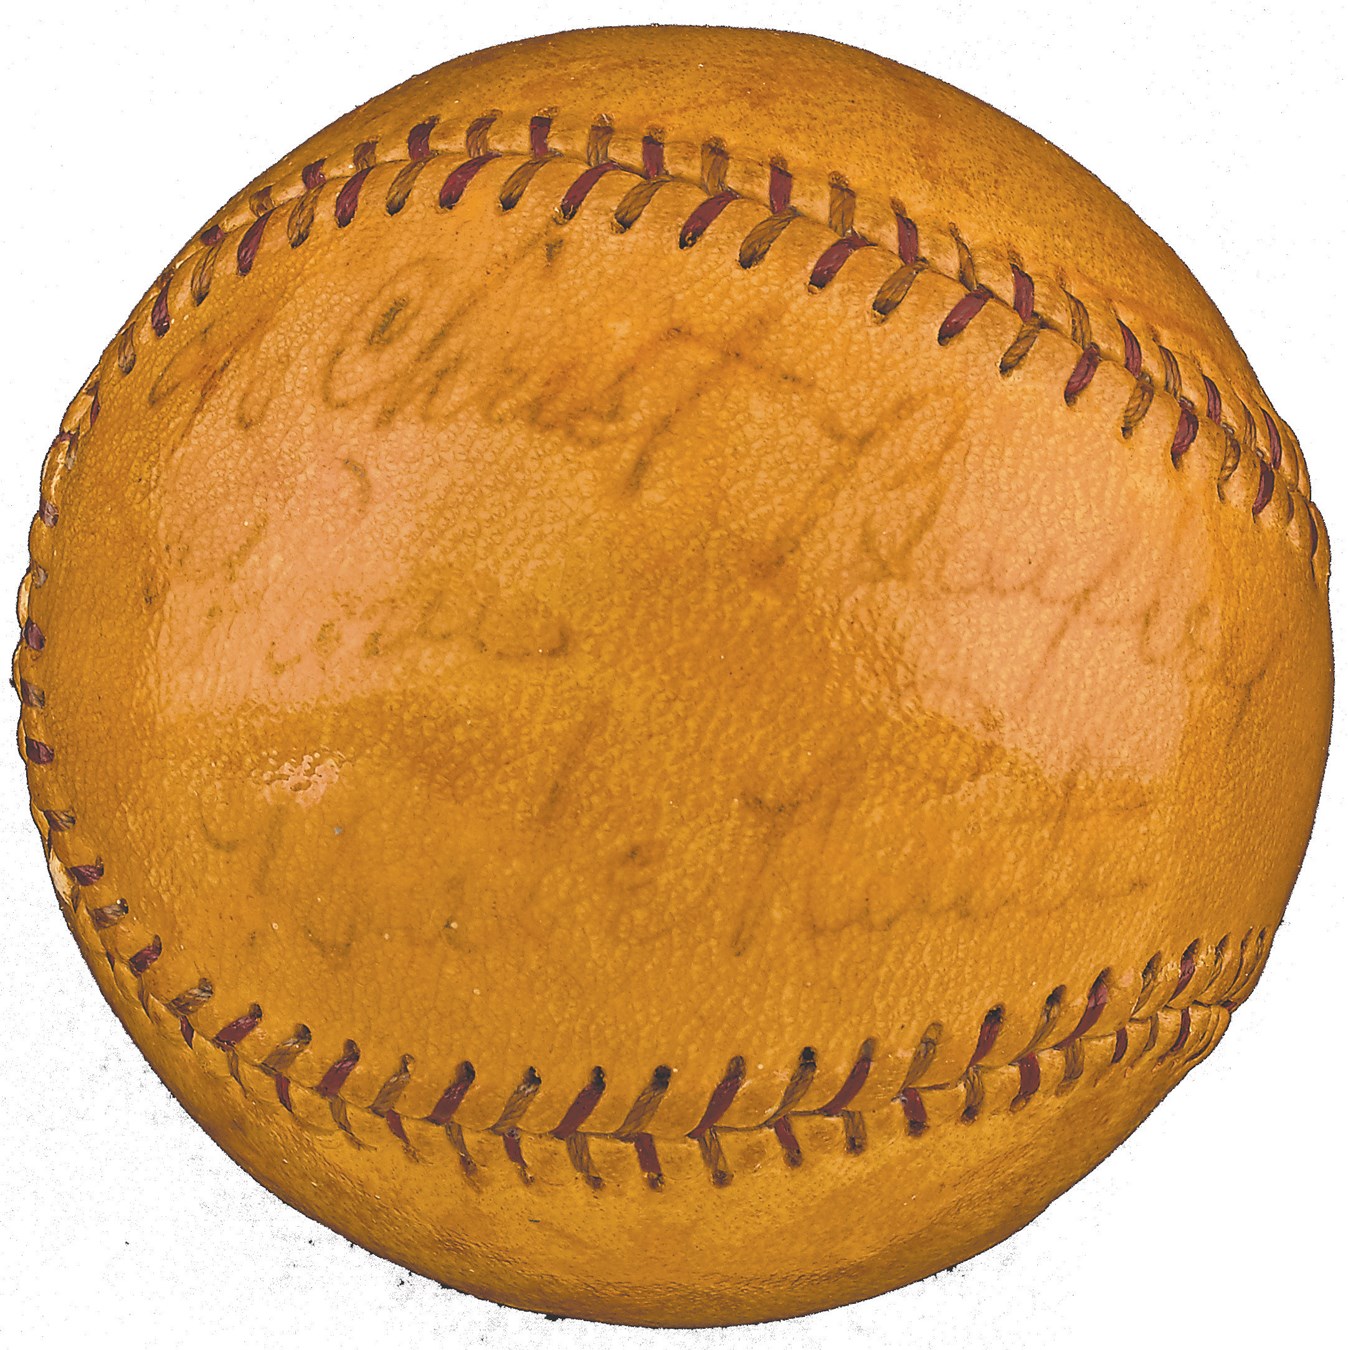 - Babe Ruth Signed Inscribed "To Christ" Baseball (JSA)